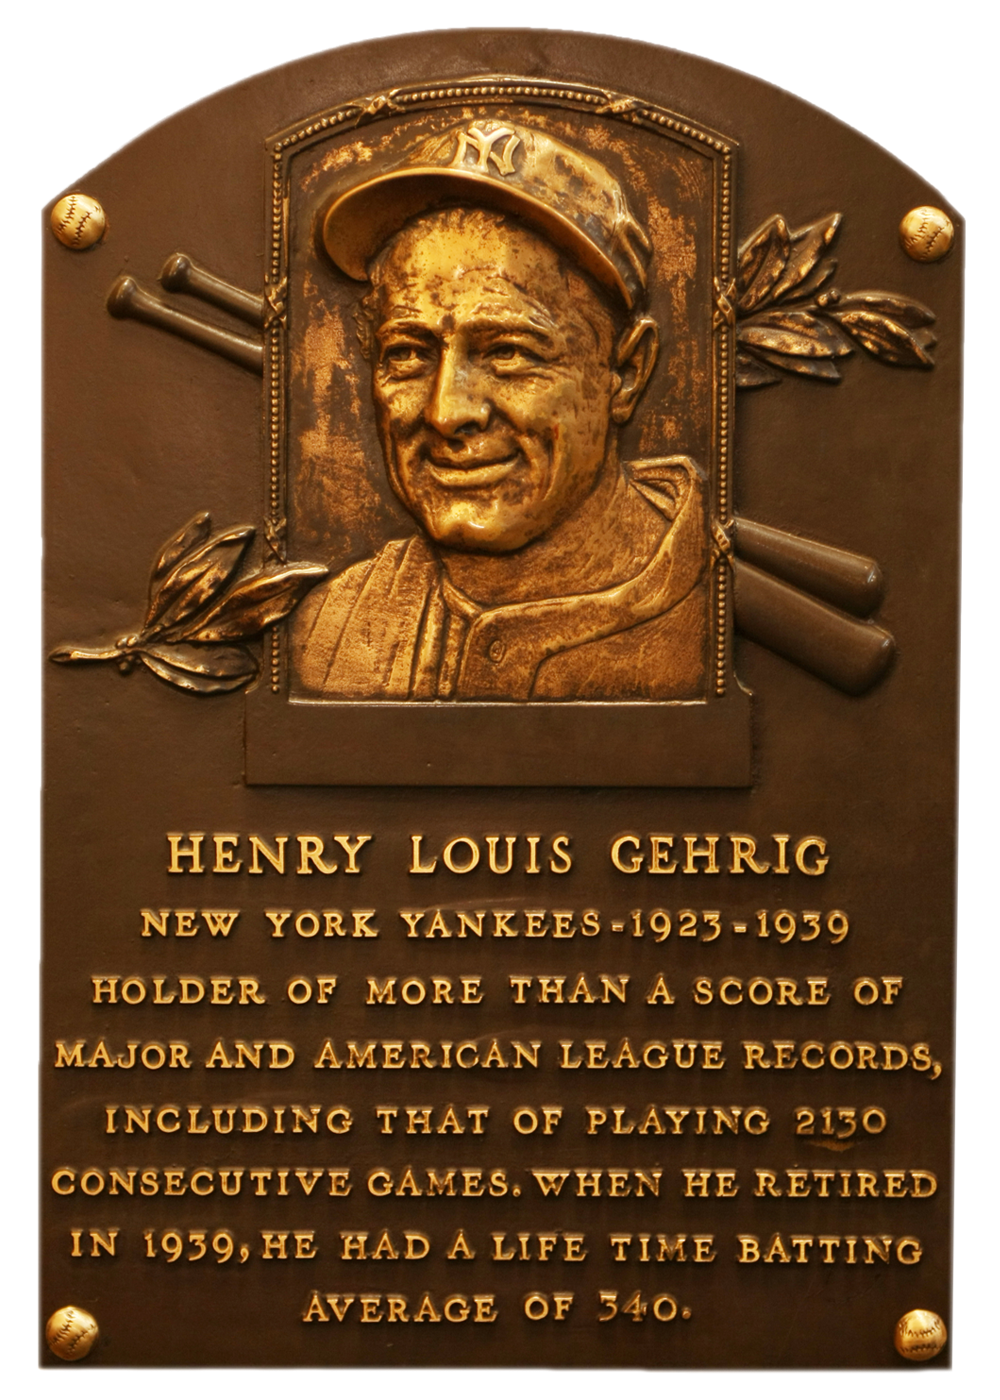 Lou Gehrig Hall of Fame plaque